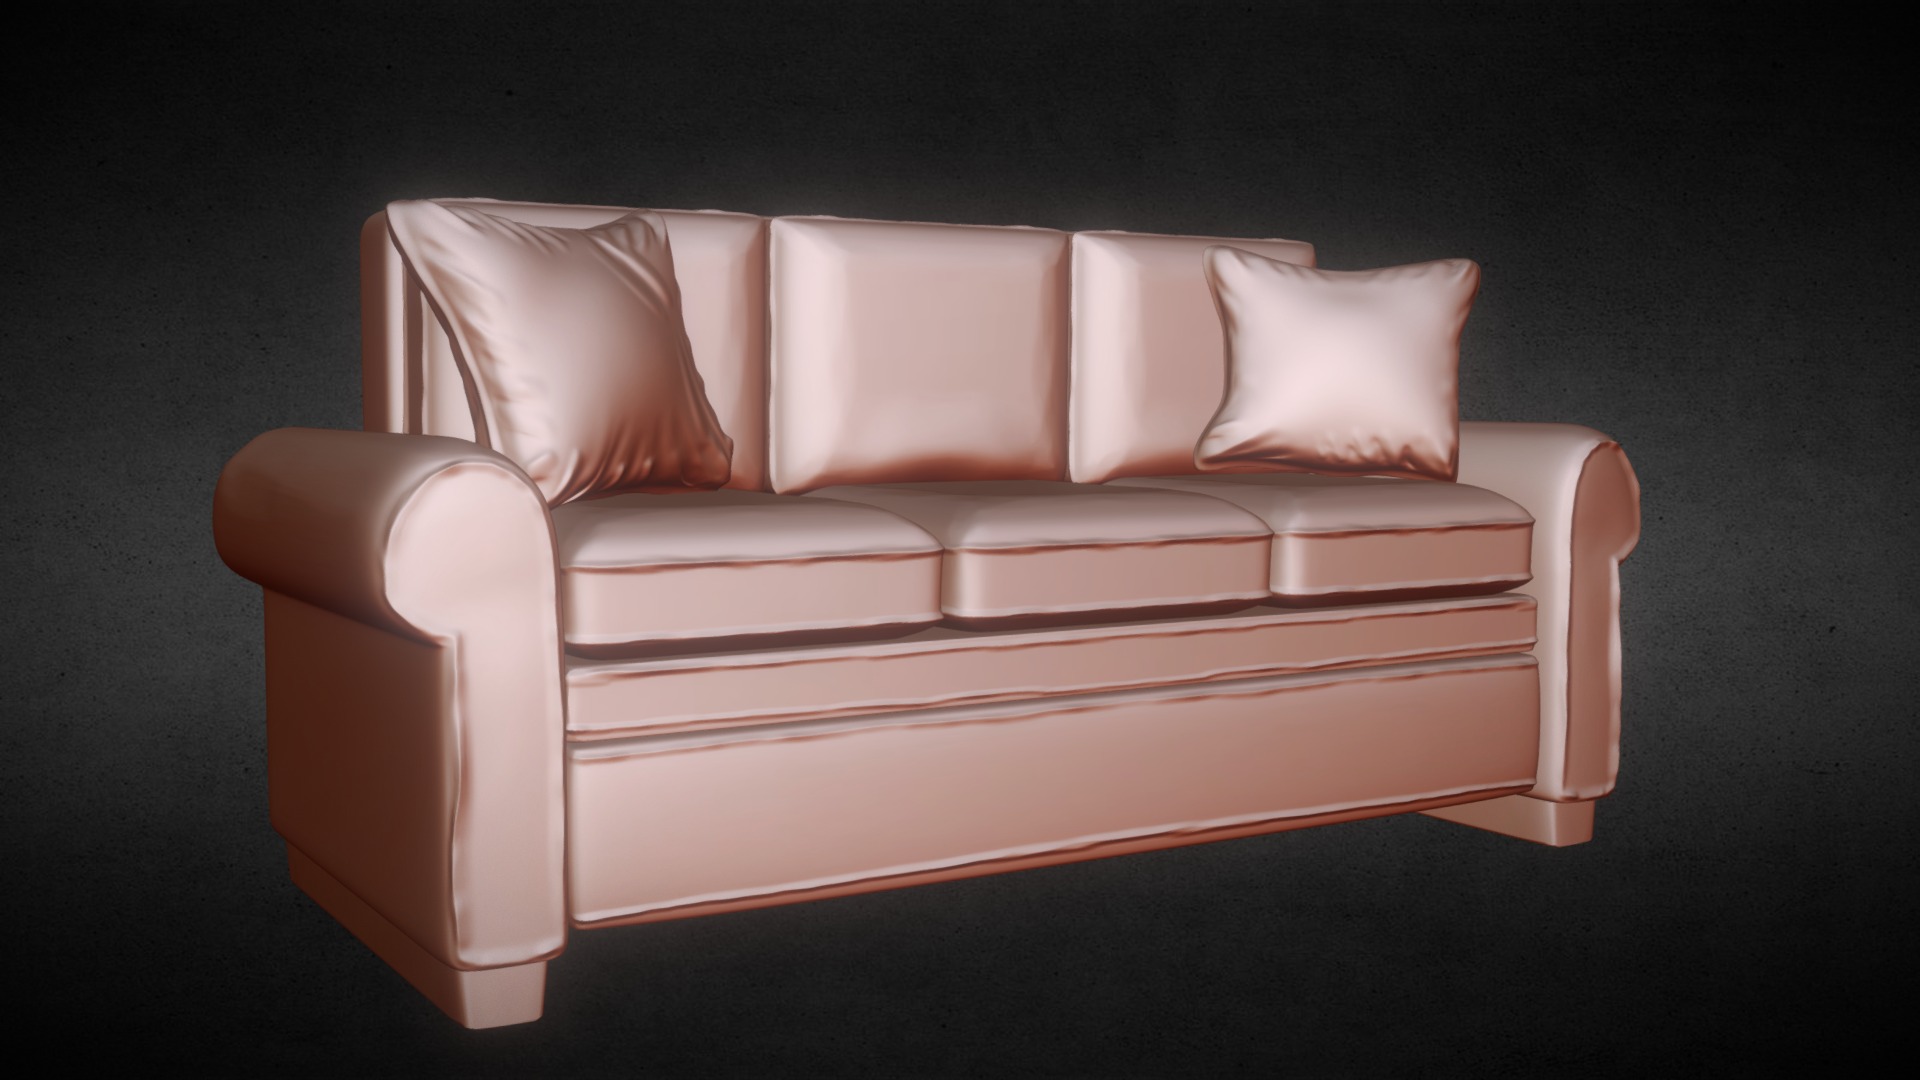 3D model Day 23 Sofa - This is a 3D model of the Day 23 Sofa. The 3D model is about a couch with pillows.